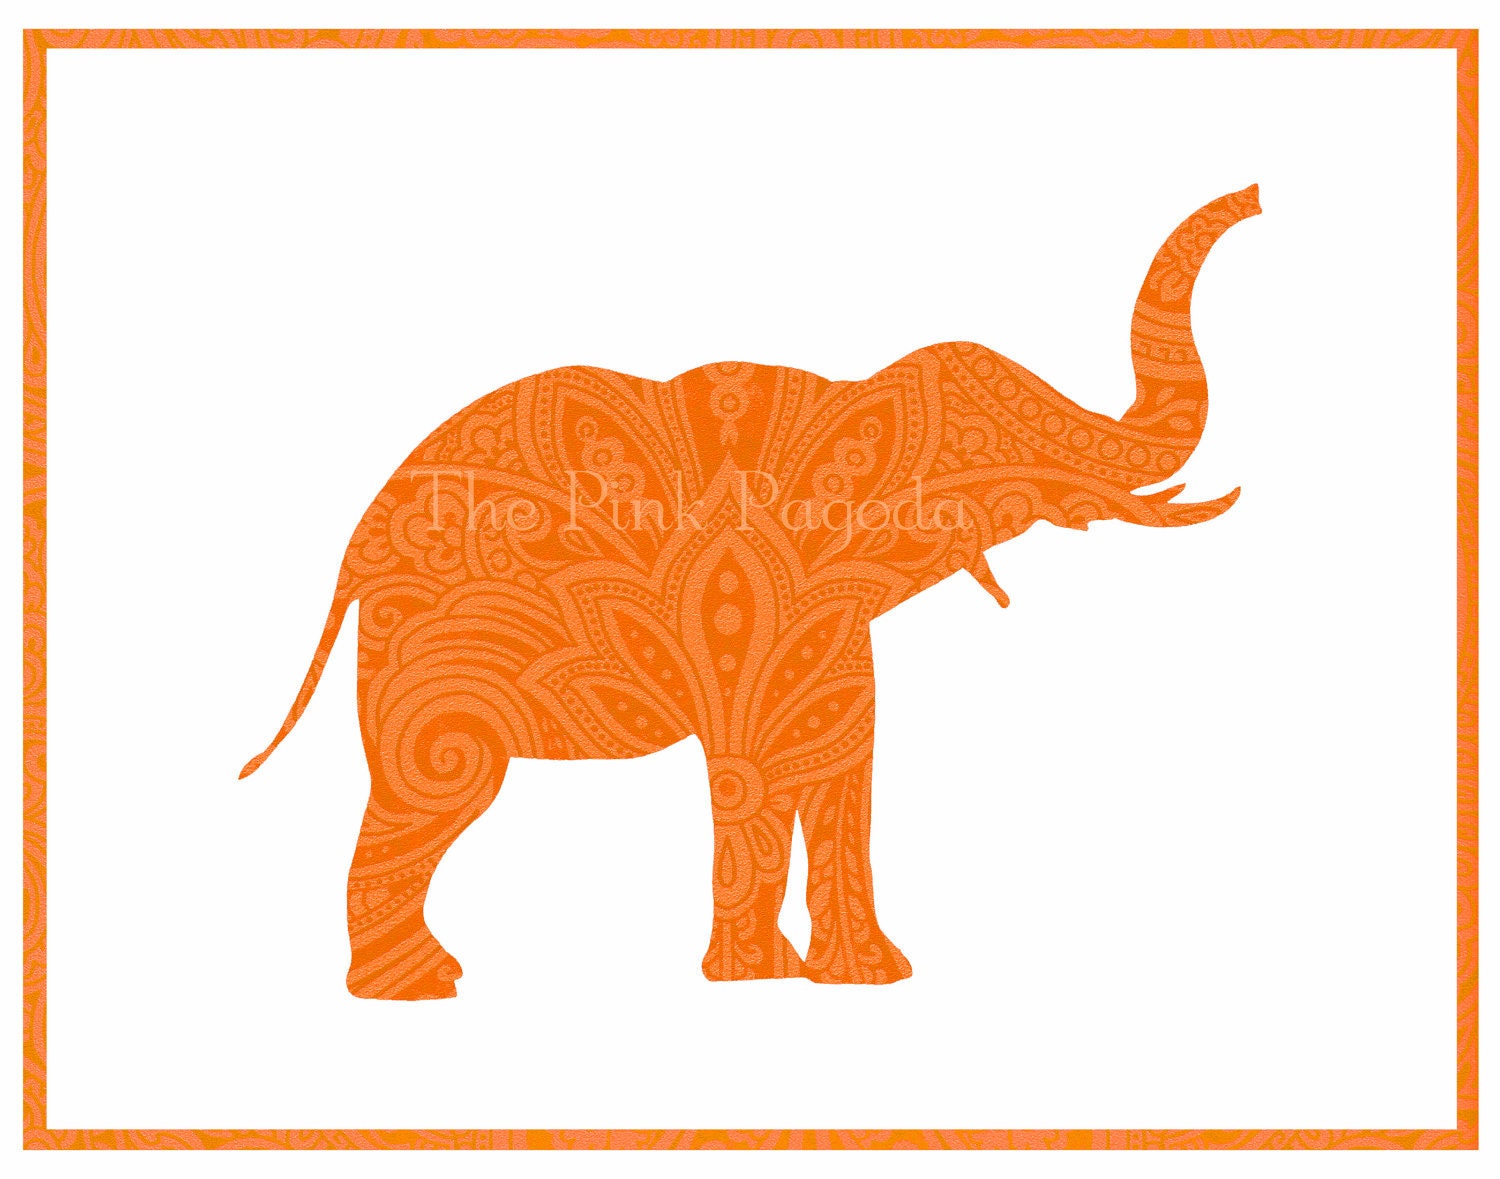 Tangerine Paisley Indian Elephant Silhouette Facing Right Giclee 11x14